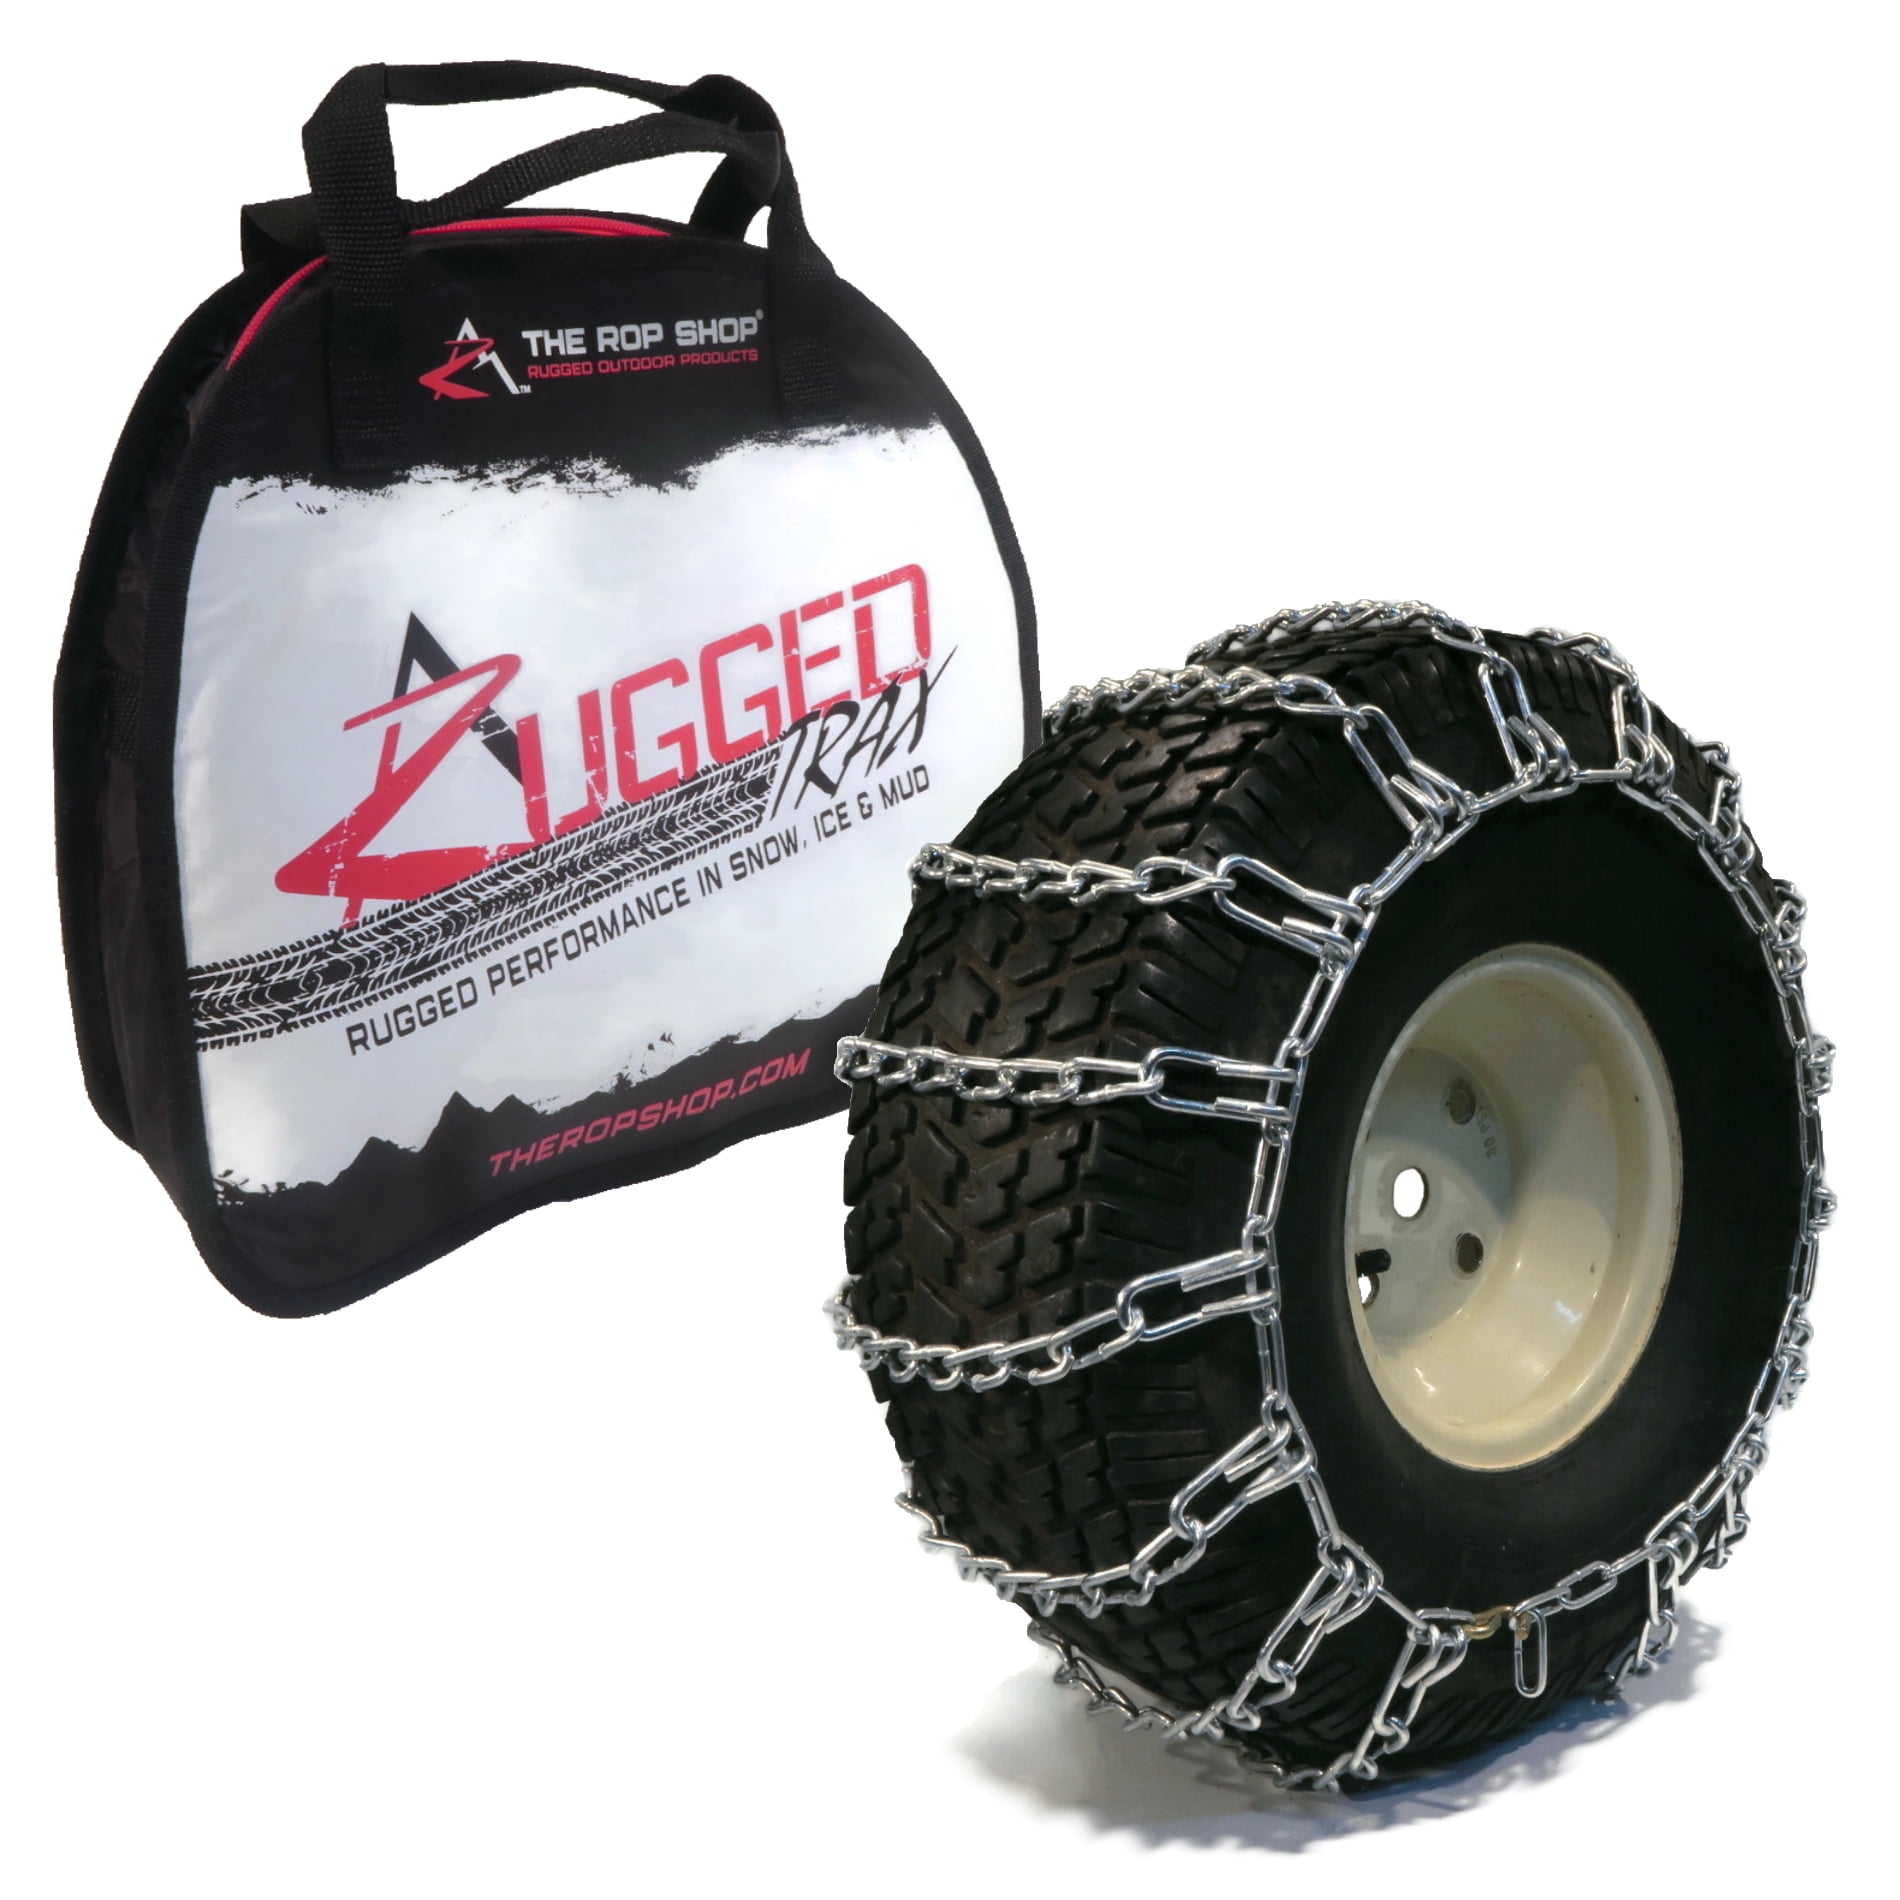 The ROP Shop New Pair 2 Link TIRE Chains 18x8.50x8 for Garden Tractors/Riders/Snowblower 